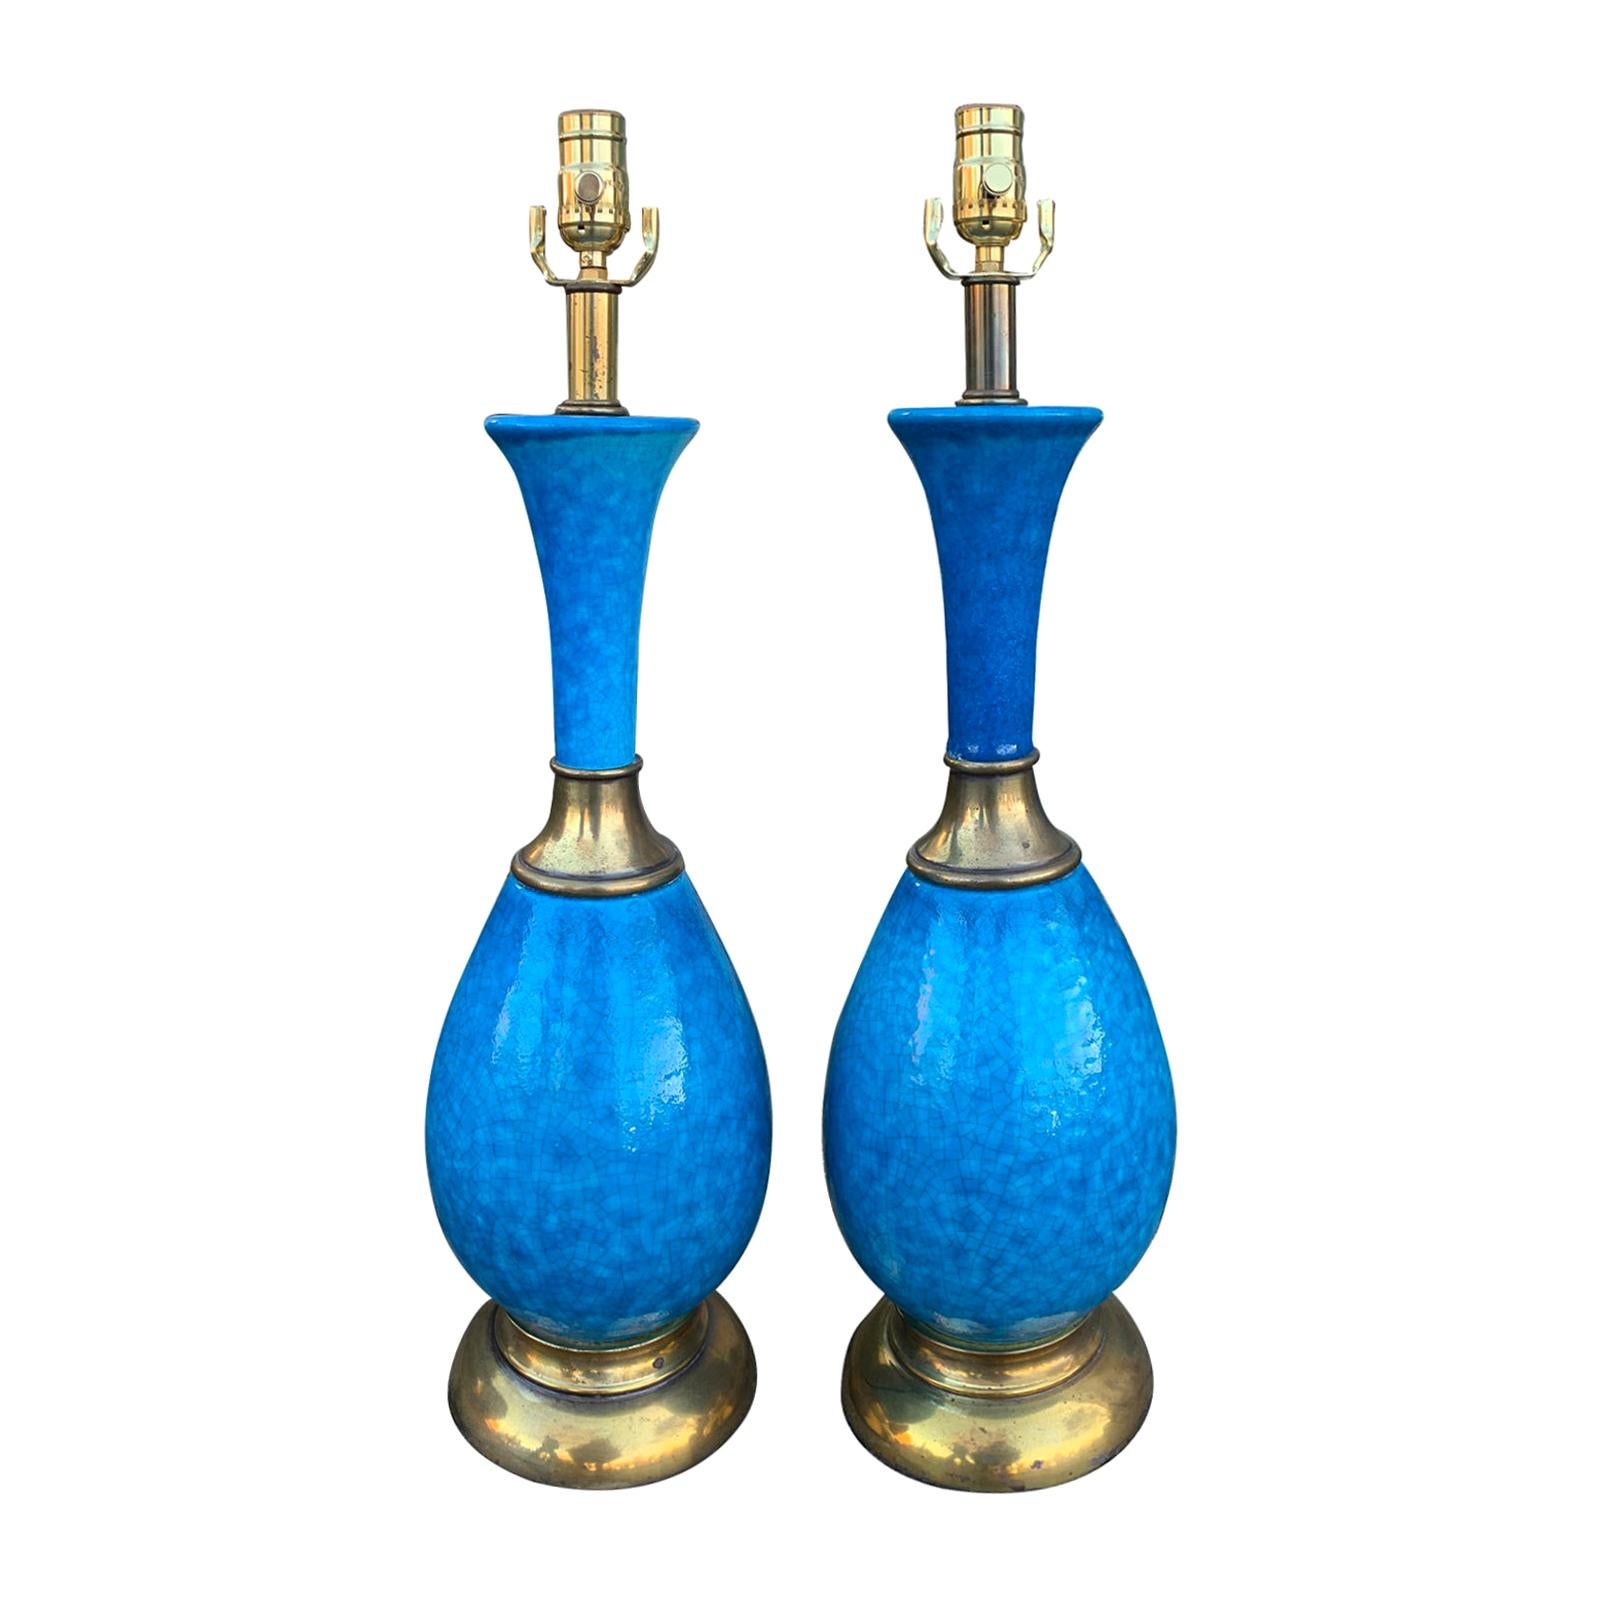 Pair of Mid-20th Century Brass Mounted Blue Pottery Lamps